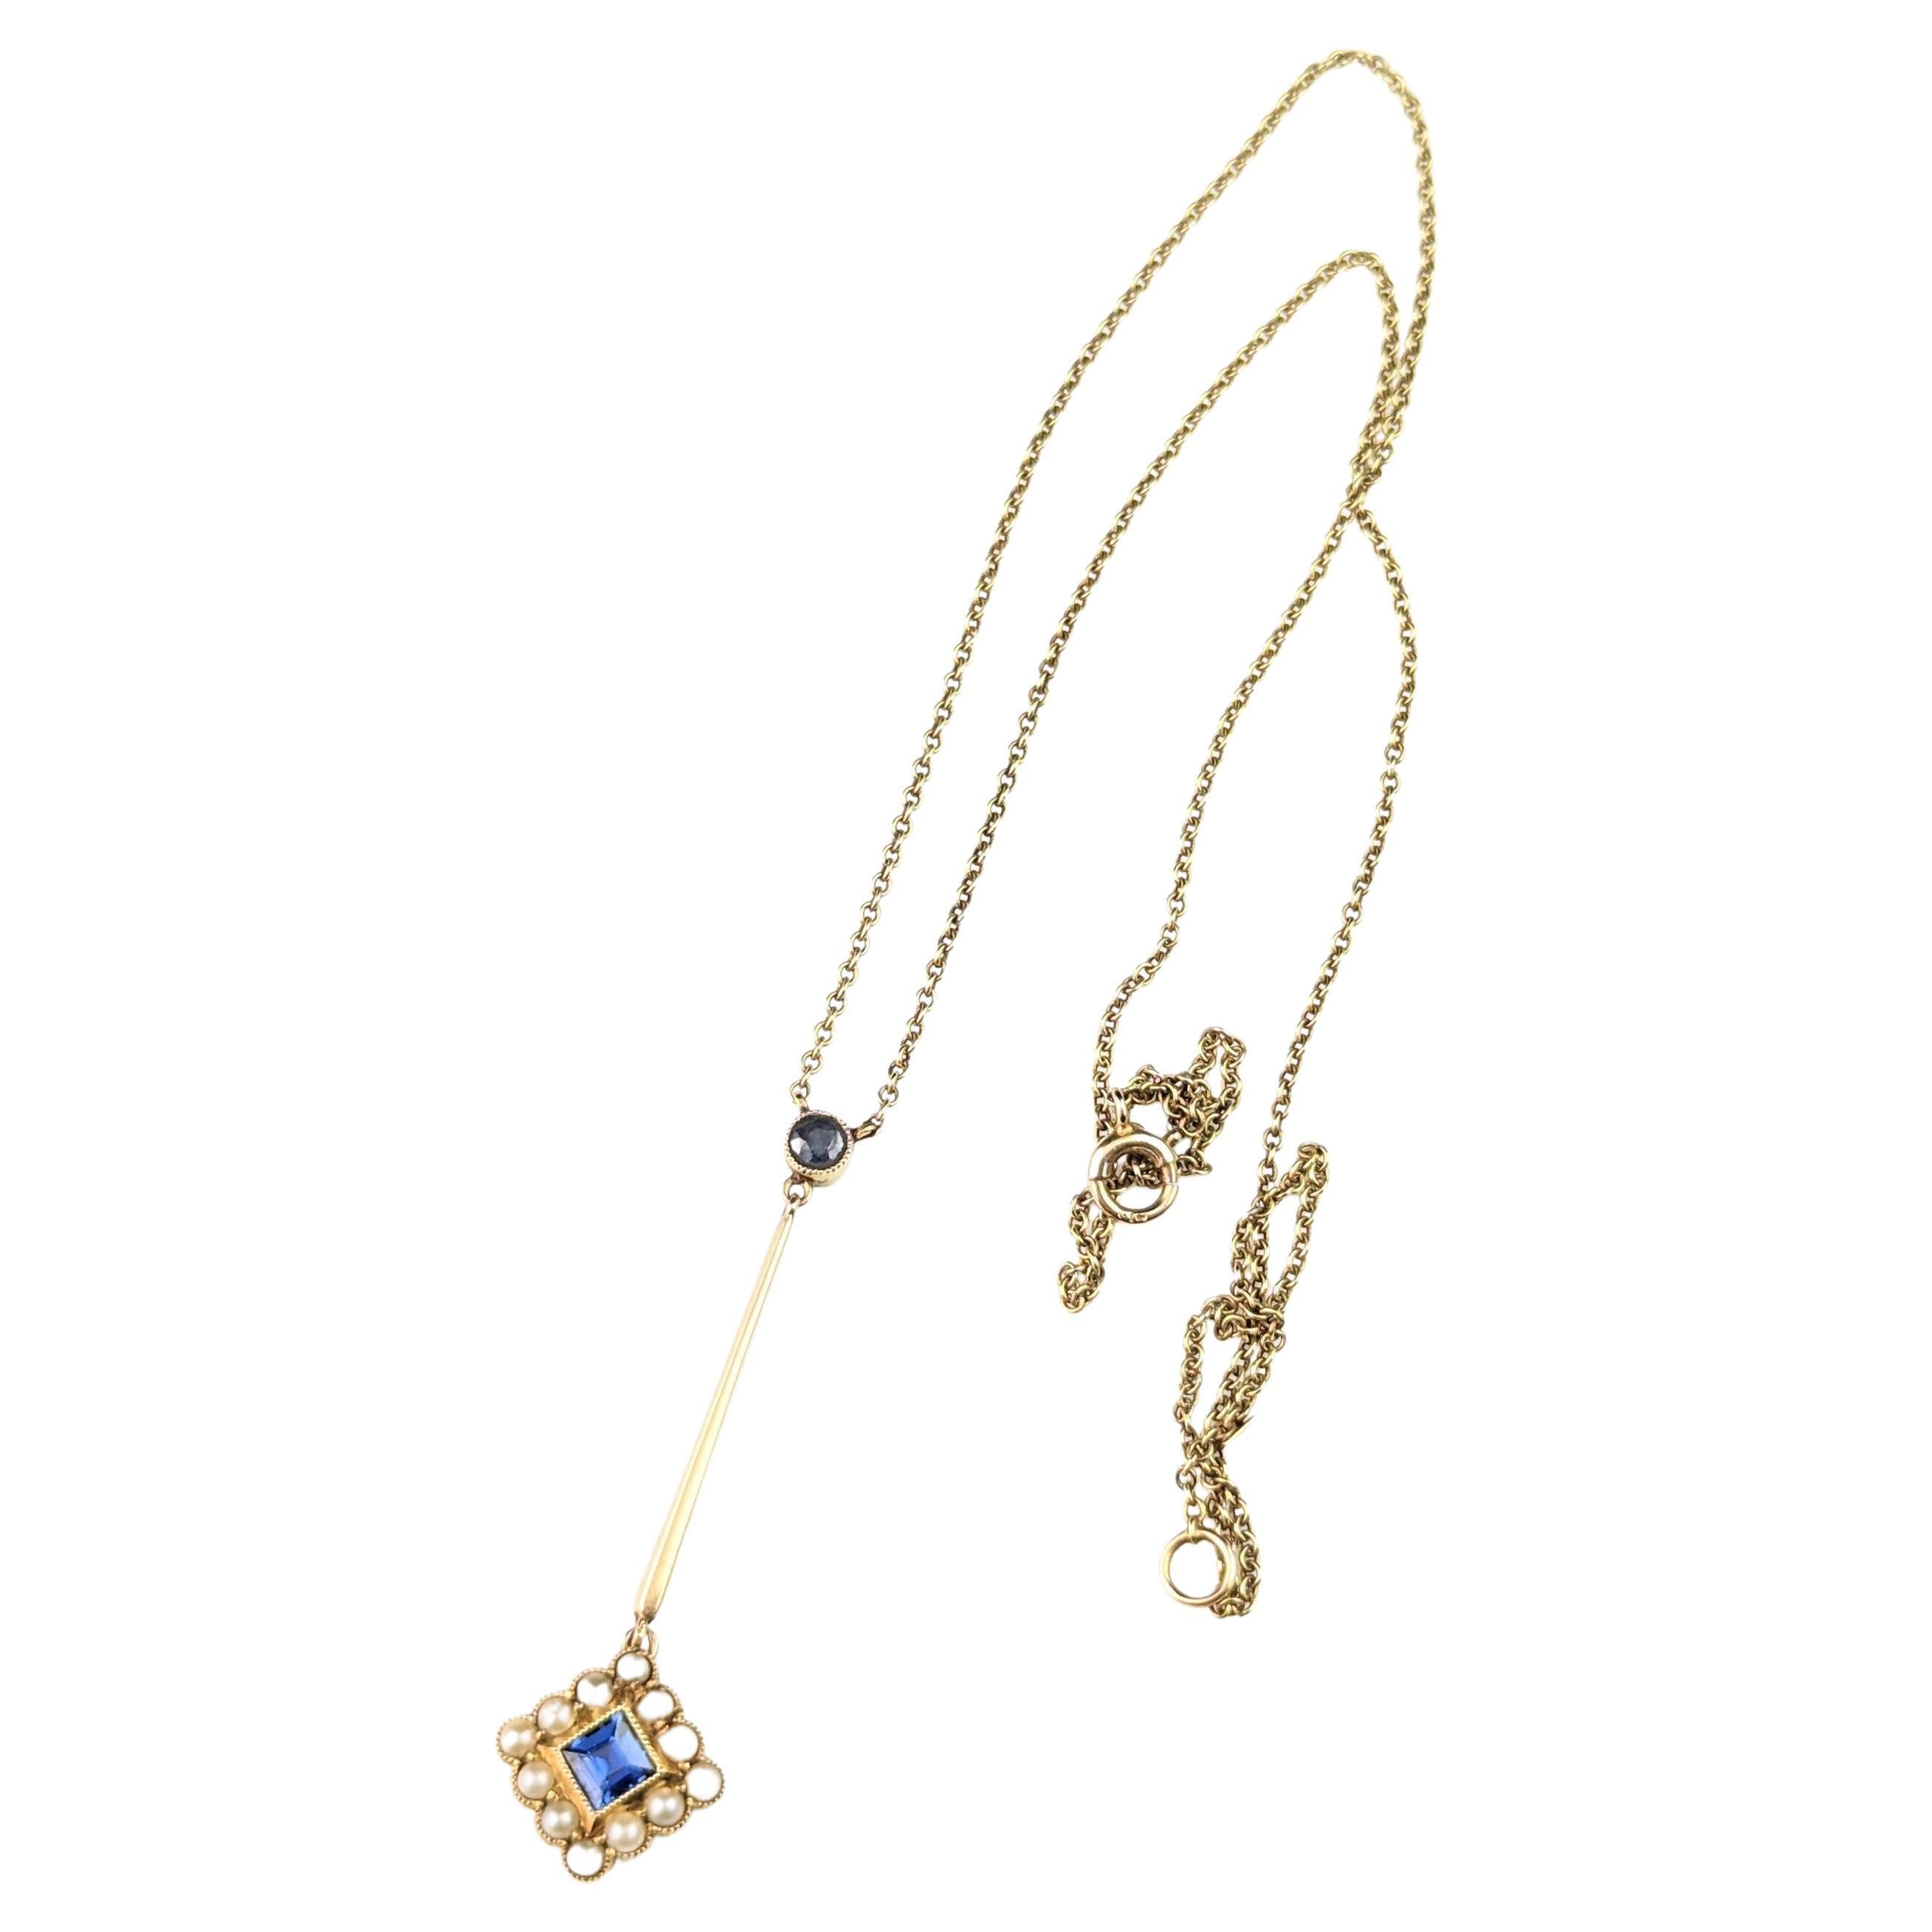 Antique Sapphire and Pearl drop pendant necklace, 15k yellow gold 